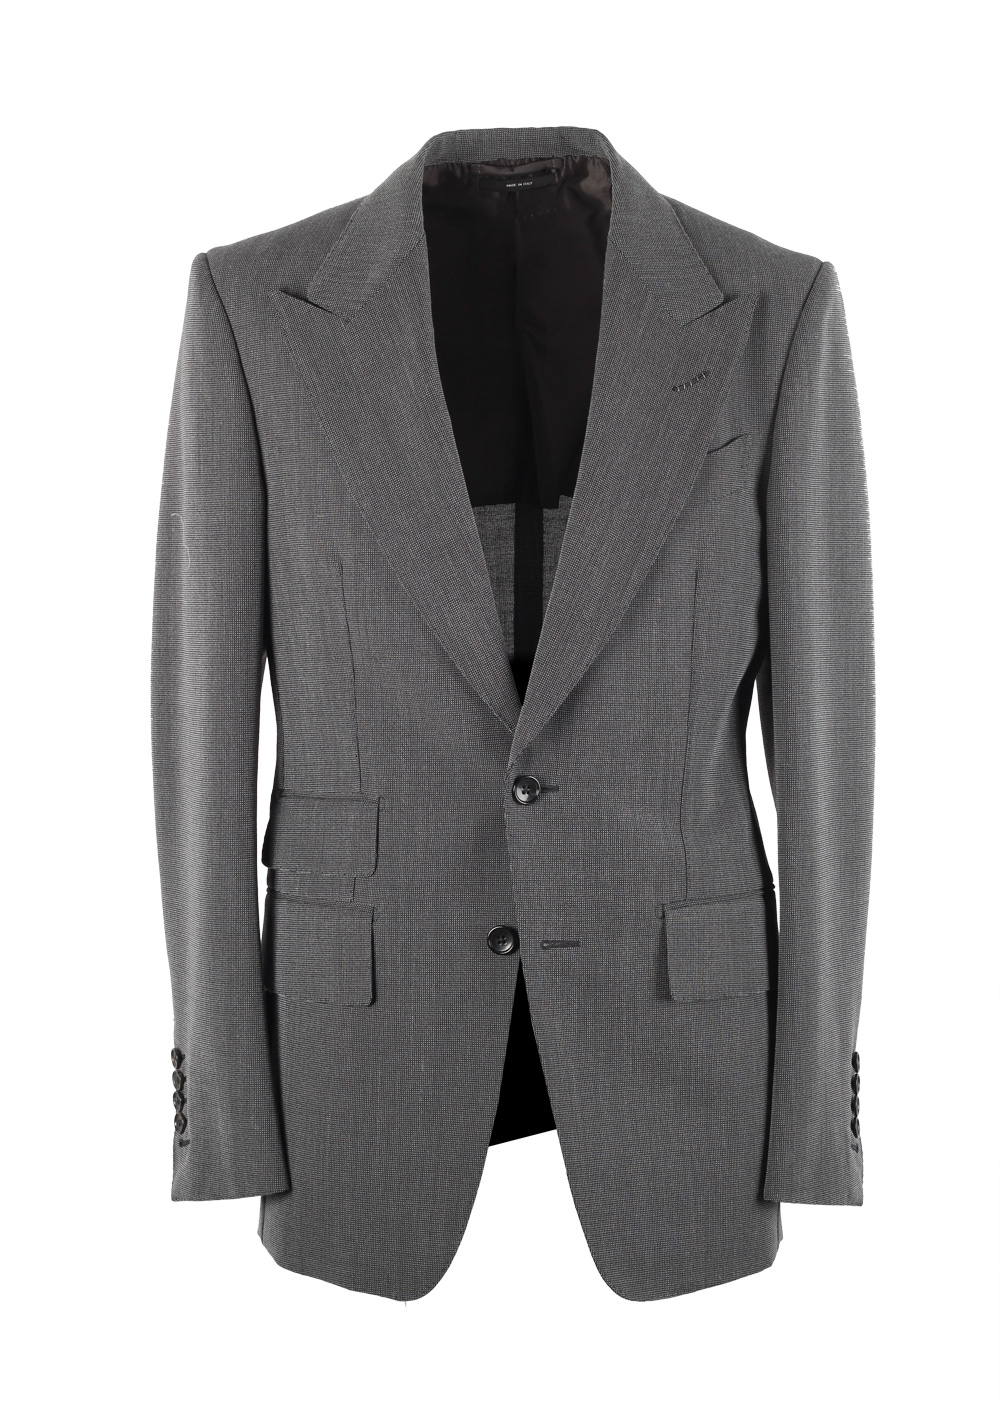 TOM FORD Shelton Gray Suit Size 46 / 36R U.S. In Mohair Wool | Costume ...